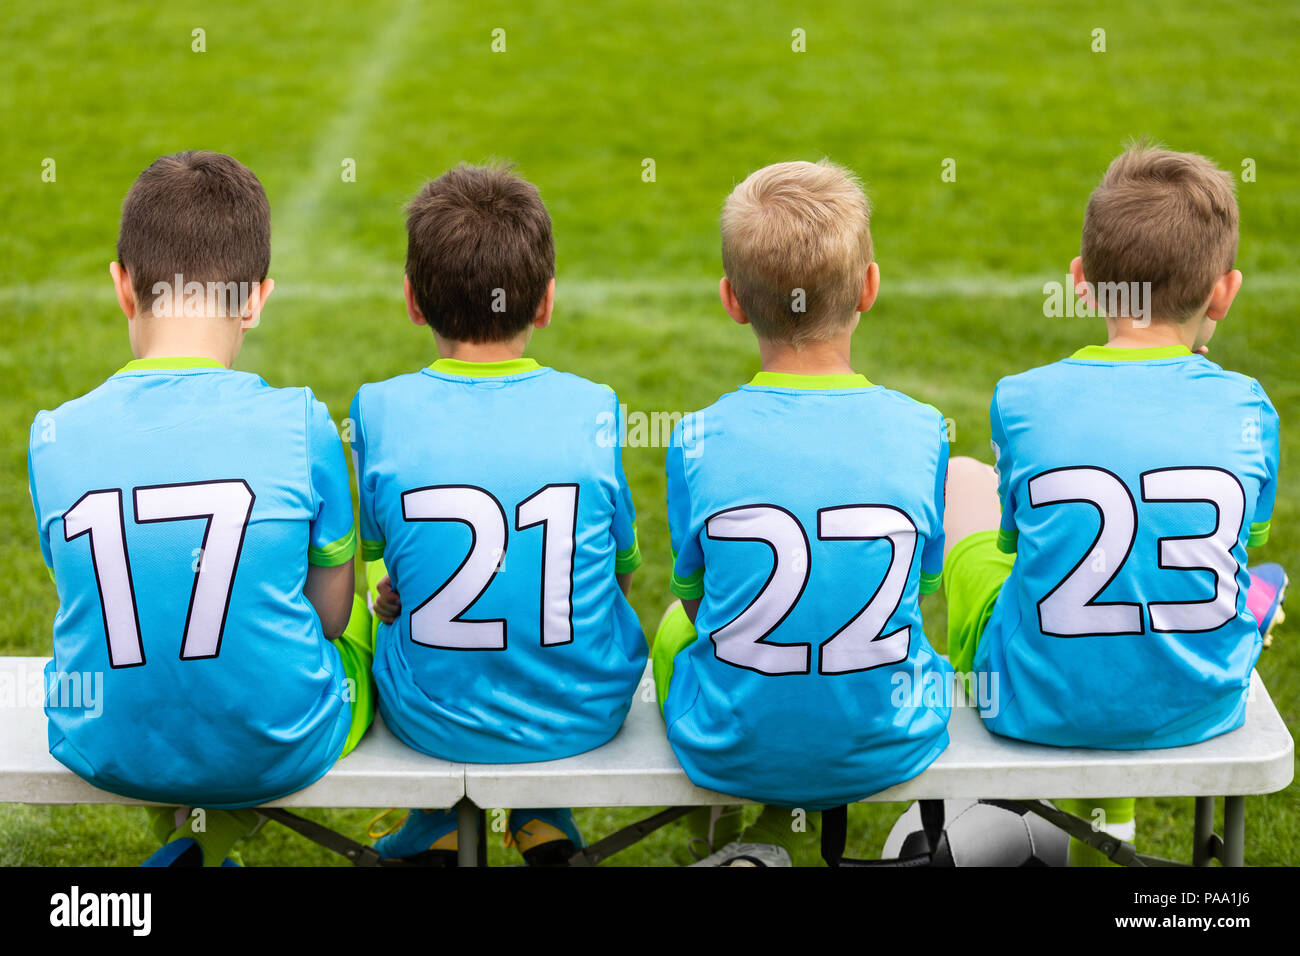 Football soccer game for children. Kids substitute players sitting on a bench. Football sports tournament for young boys Stock Photo